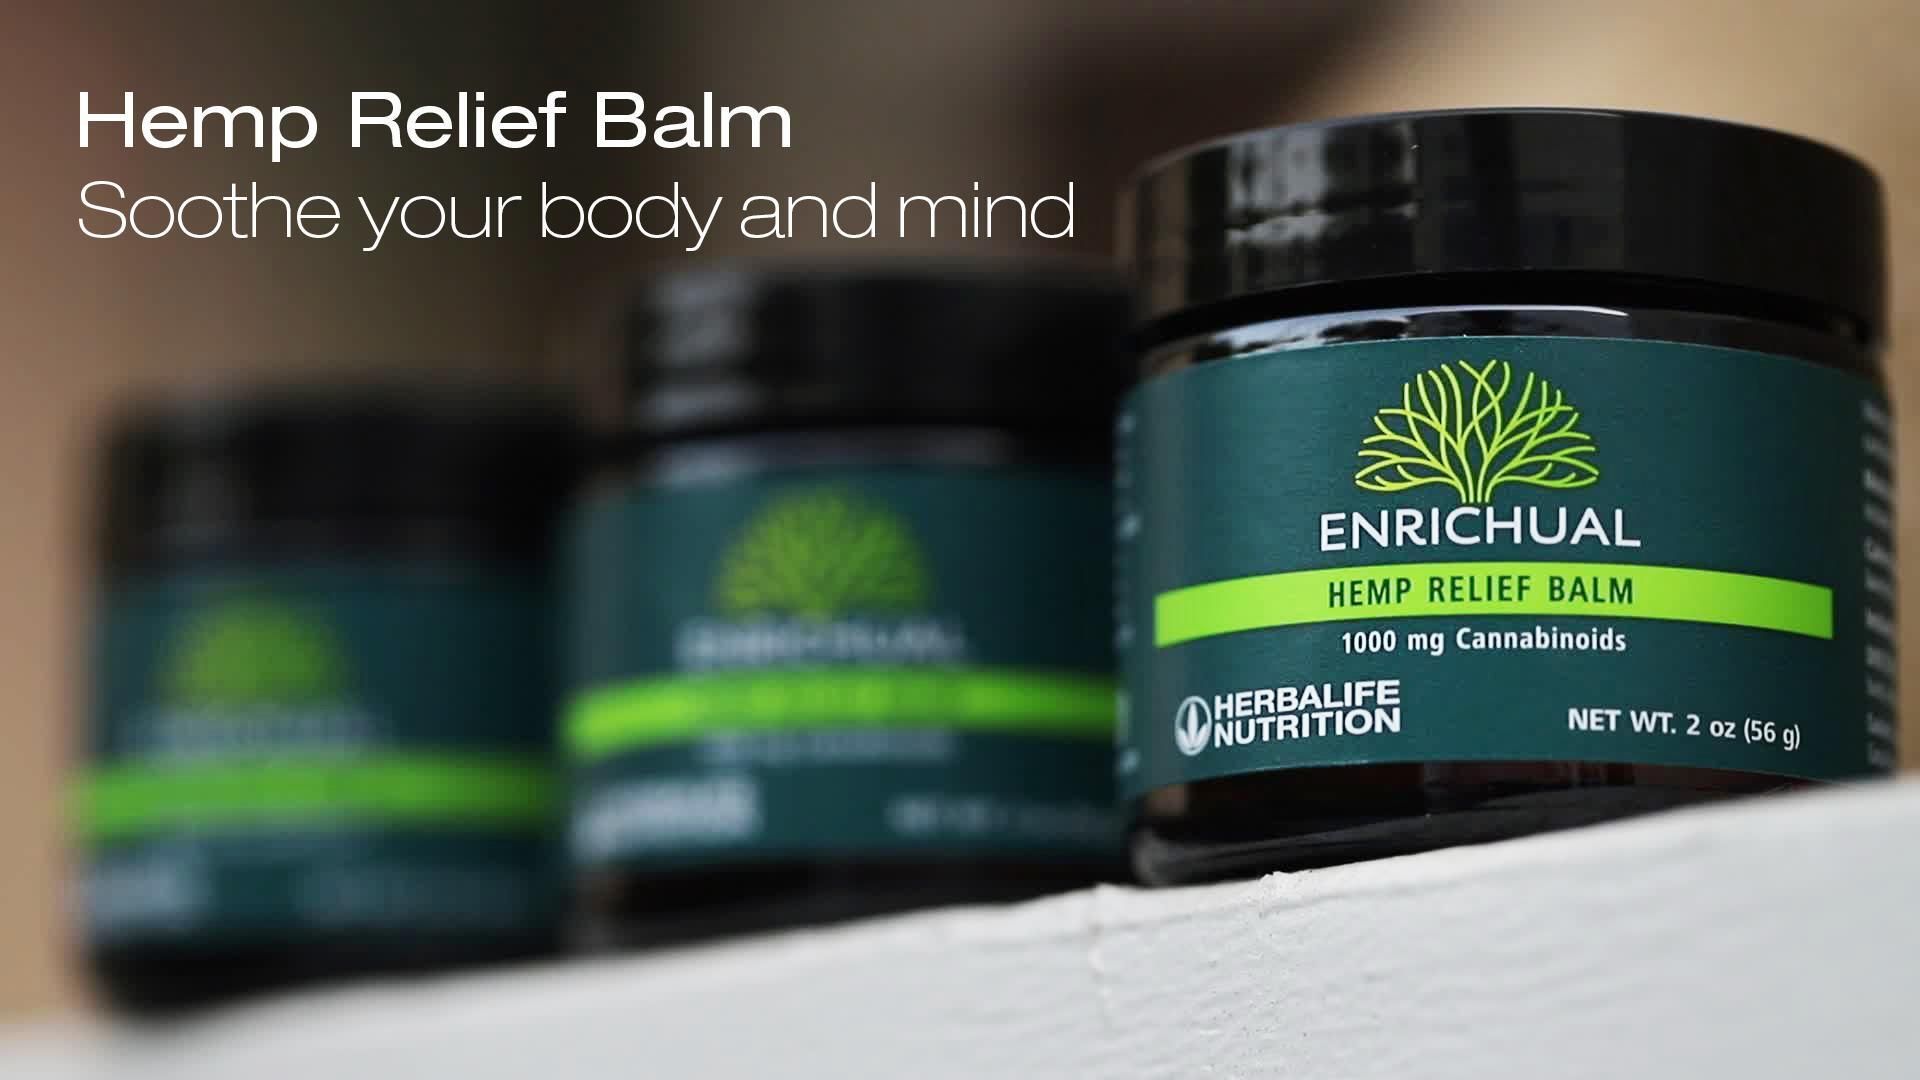 Enrichual Hemp Relief Balm: Know the Products